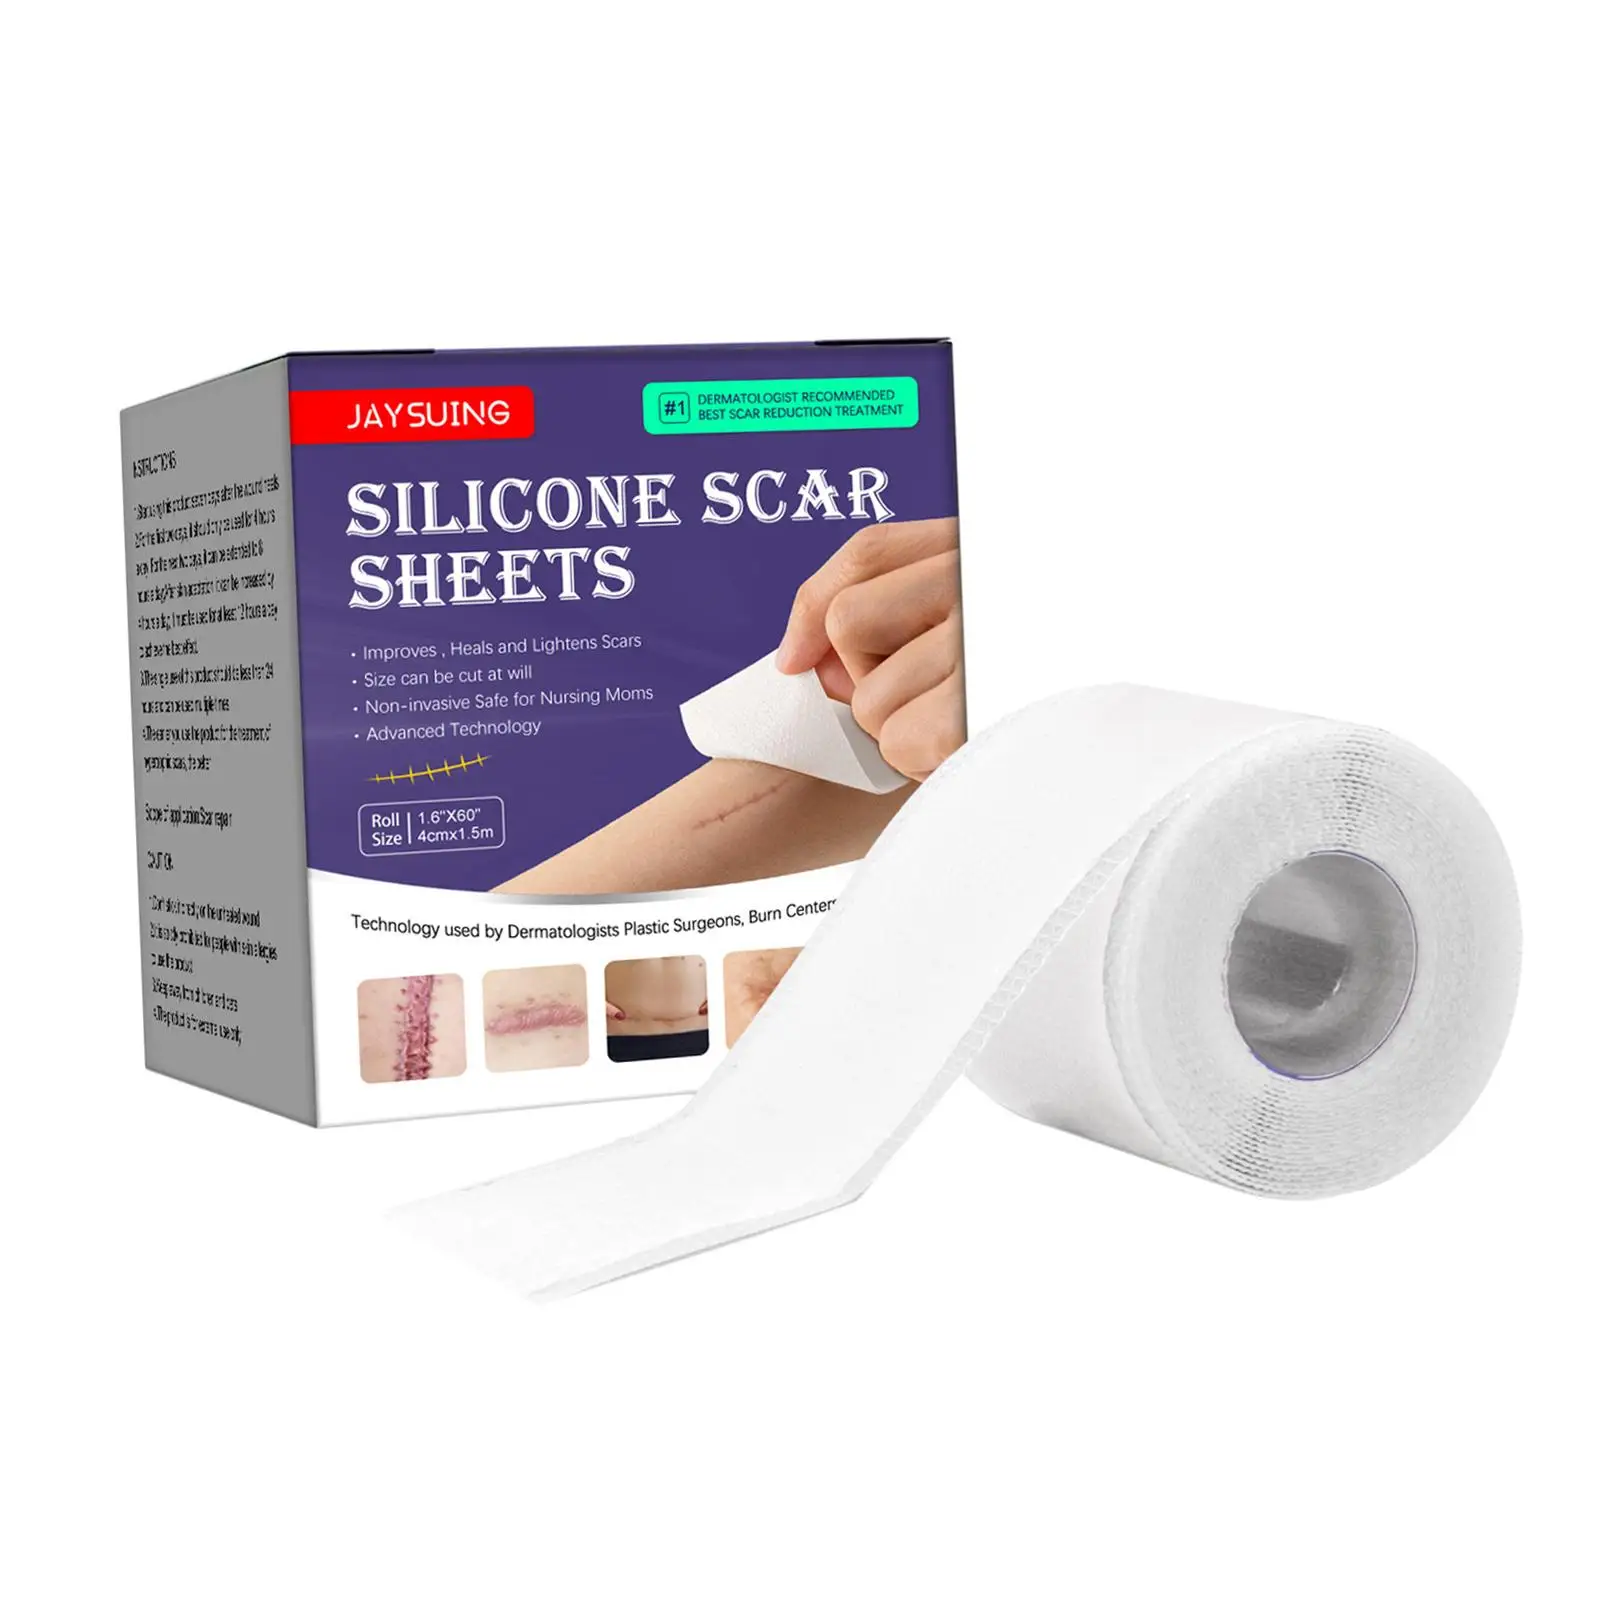 Silicone Scar Sheets Painlessly Anti Stain Reduce Redness Itchiness Scar Strips Scar Tape Roll for Pregnant Breastfeeding Moms